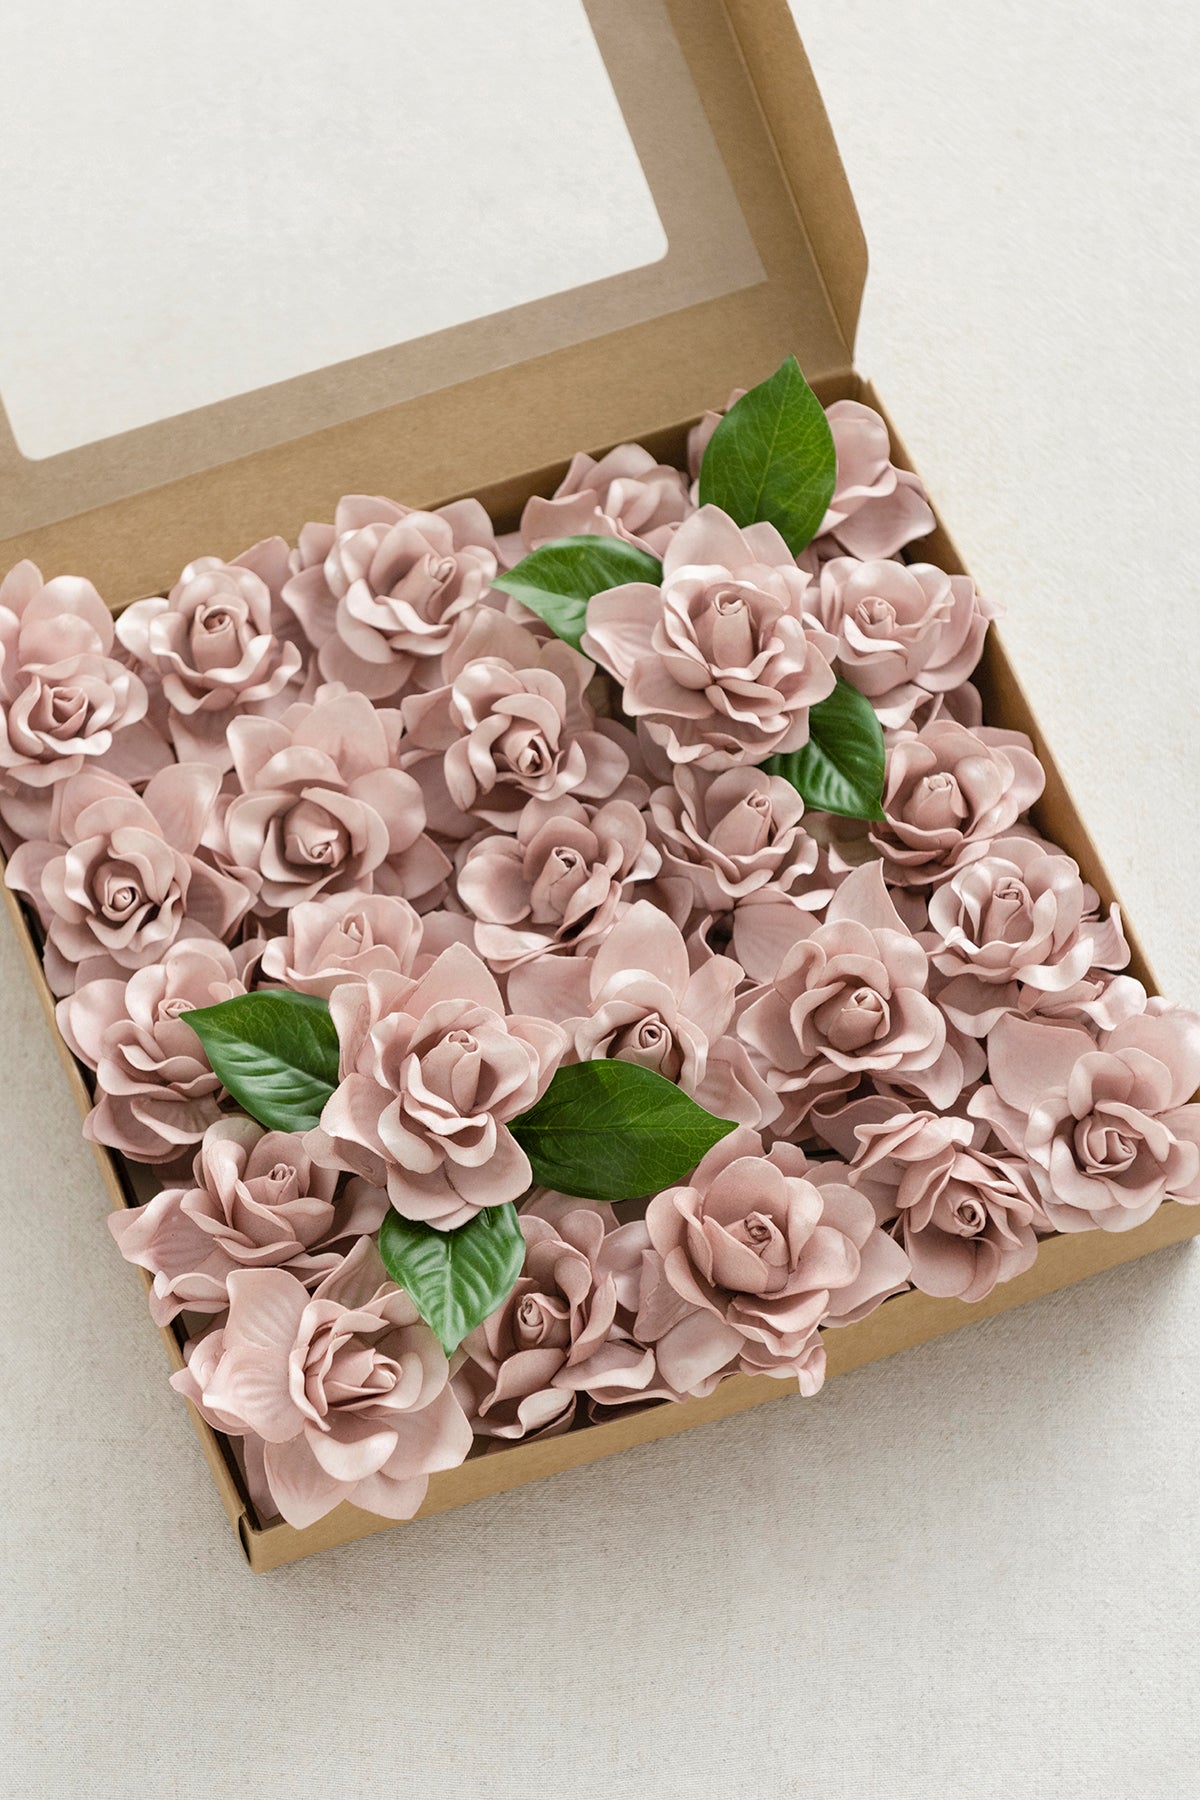 DIY Supporting Flower Boxes in Dusty Rose & Cream